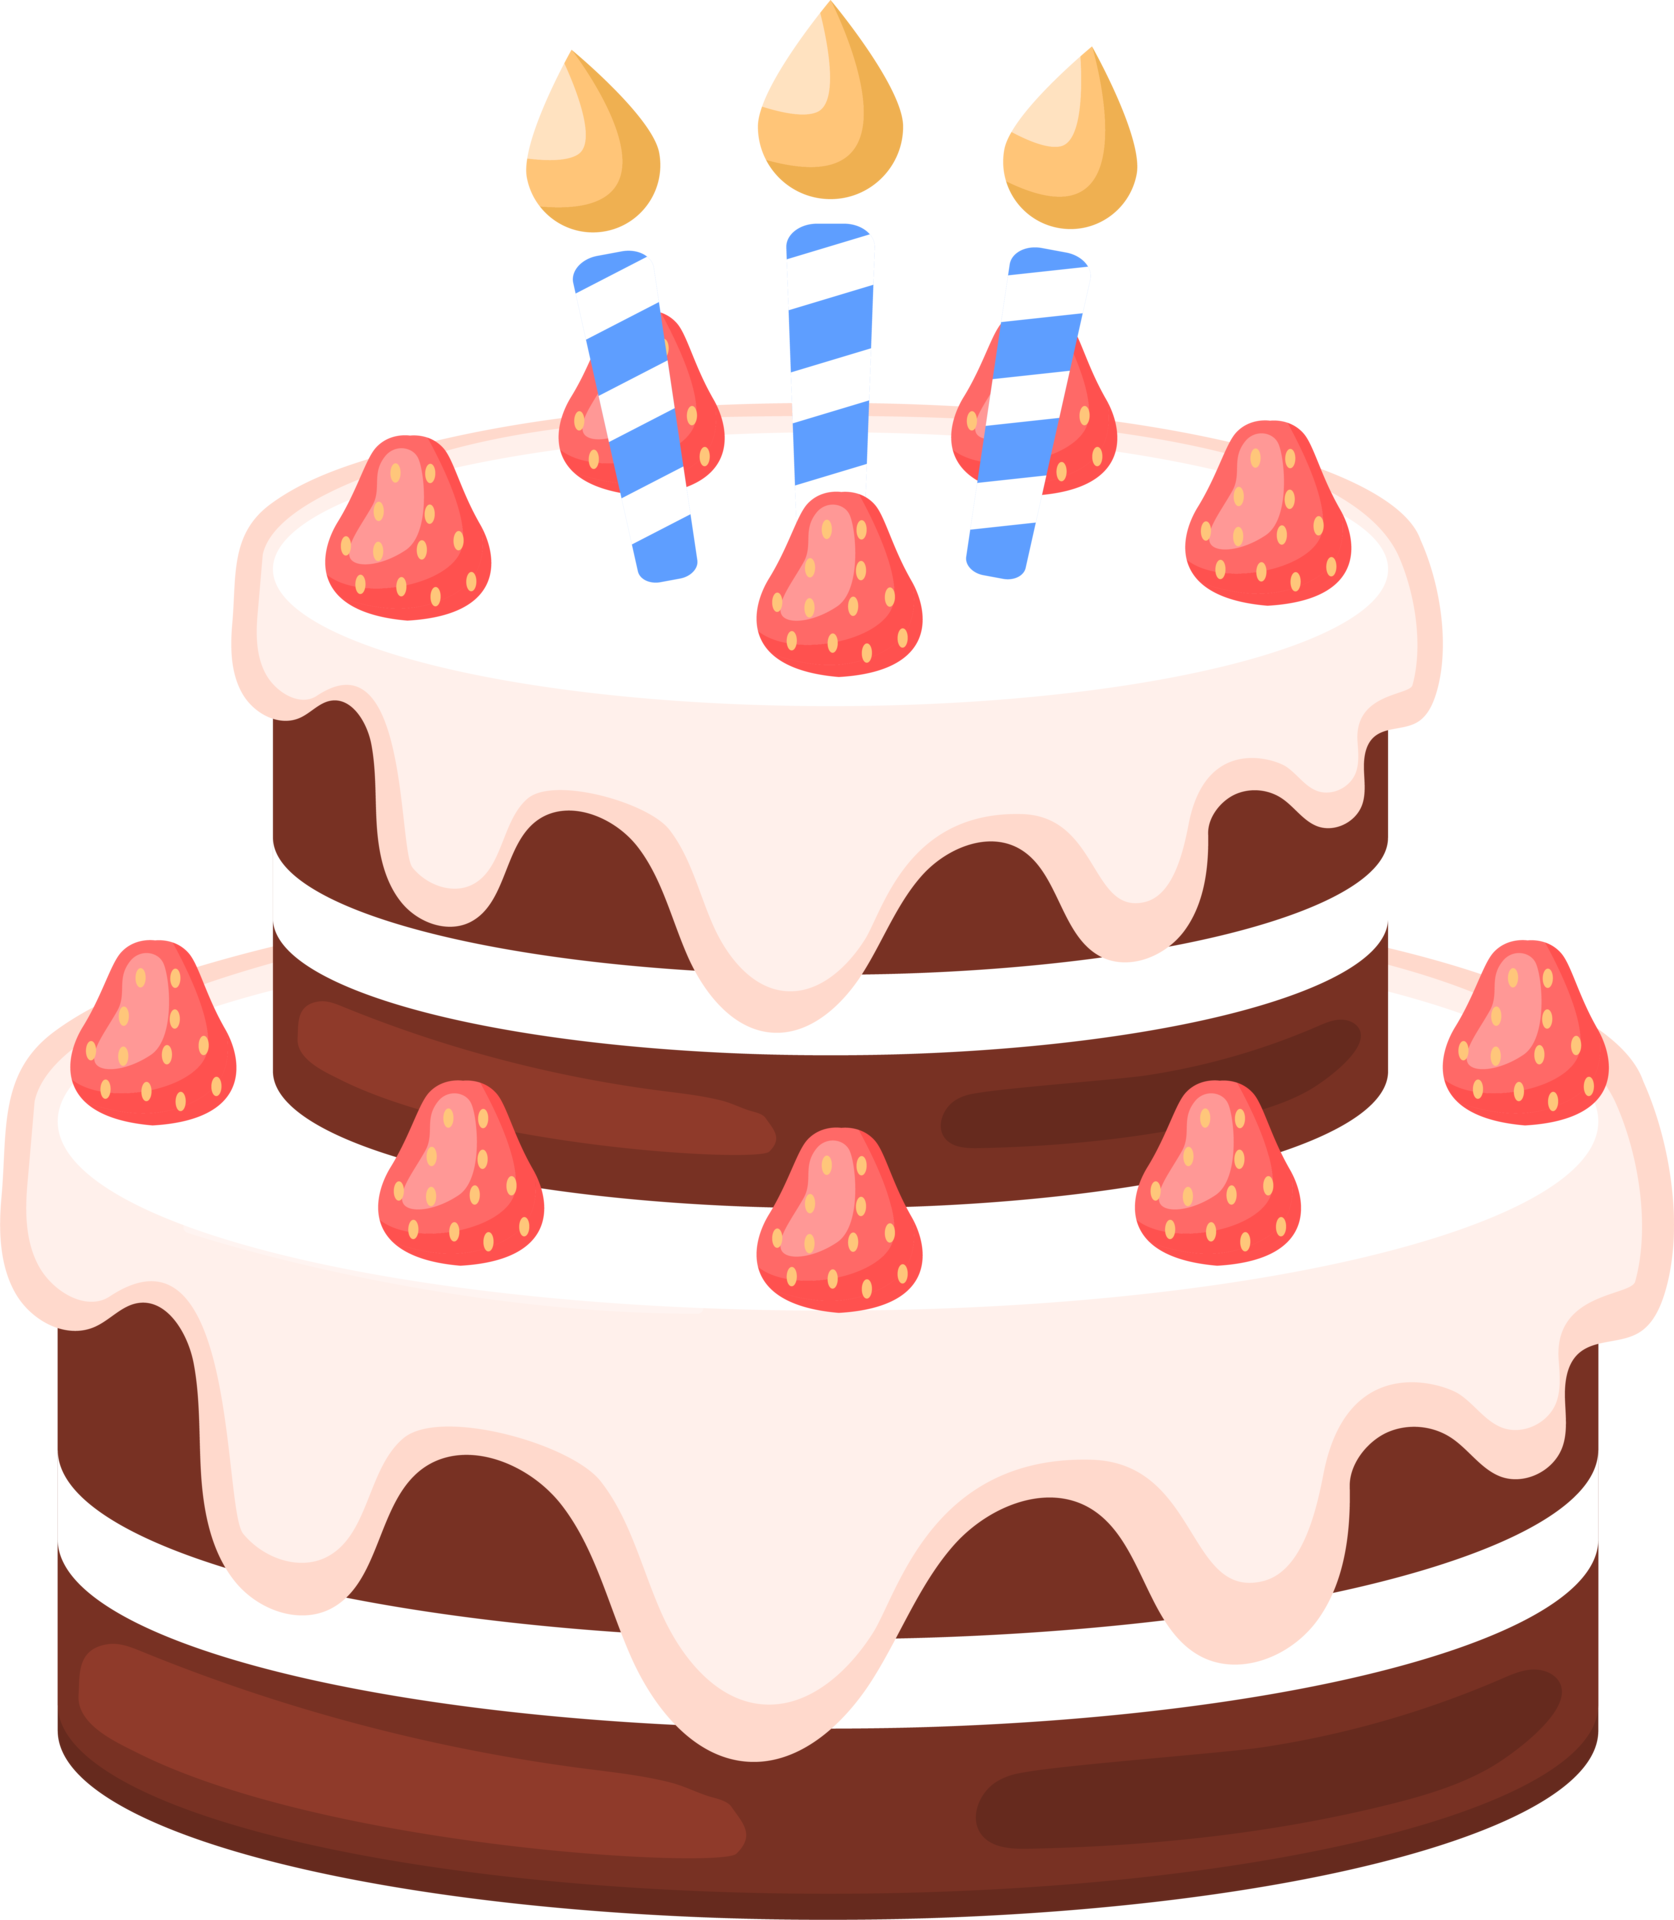 Birthday Cake With Candles Illustration 36273123 PNG